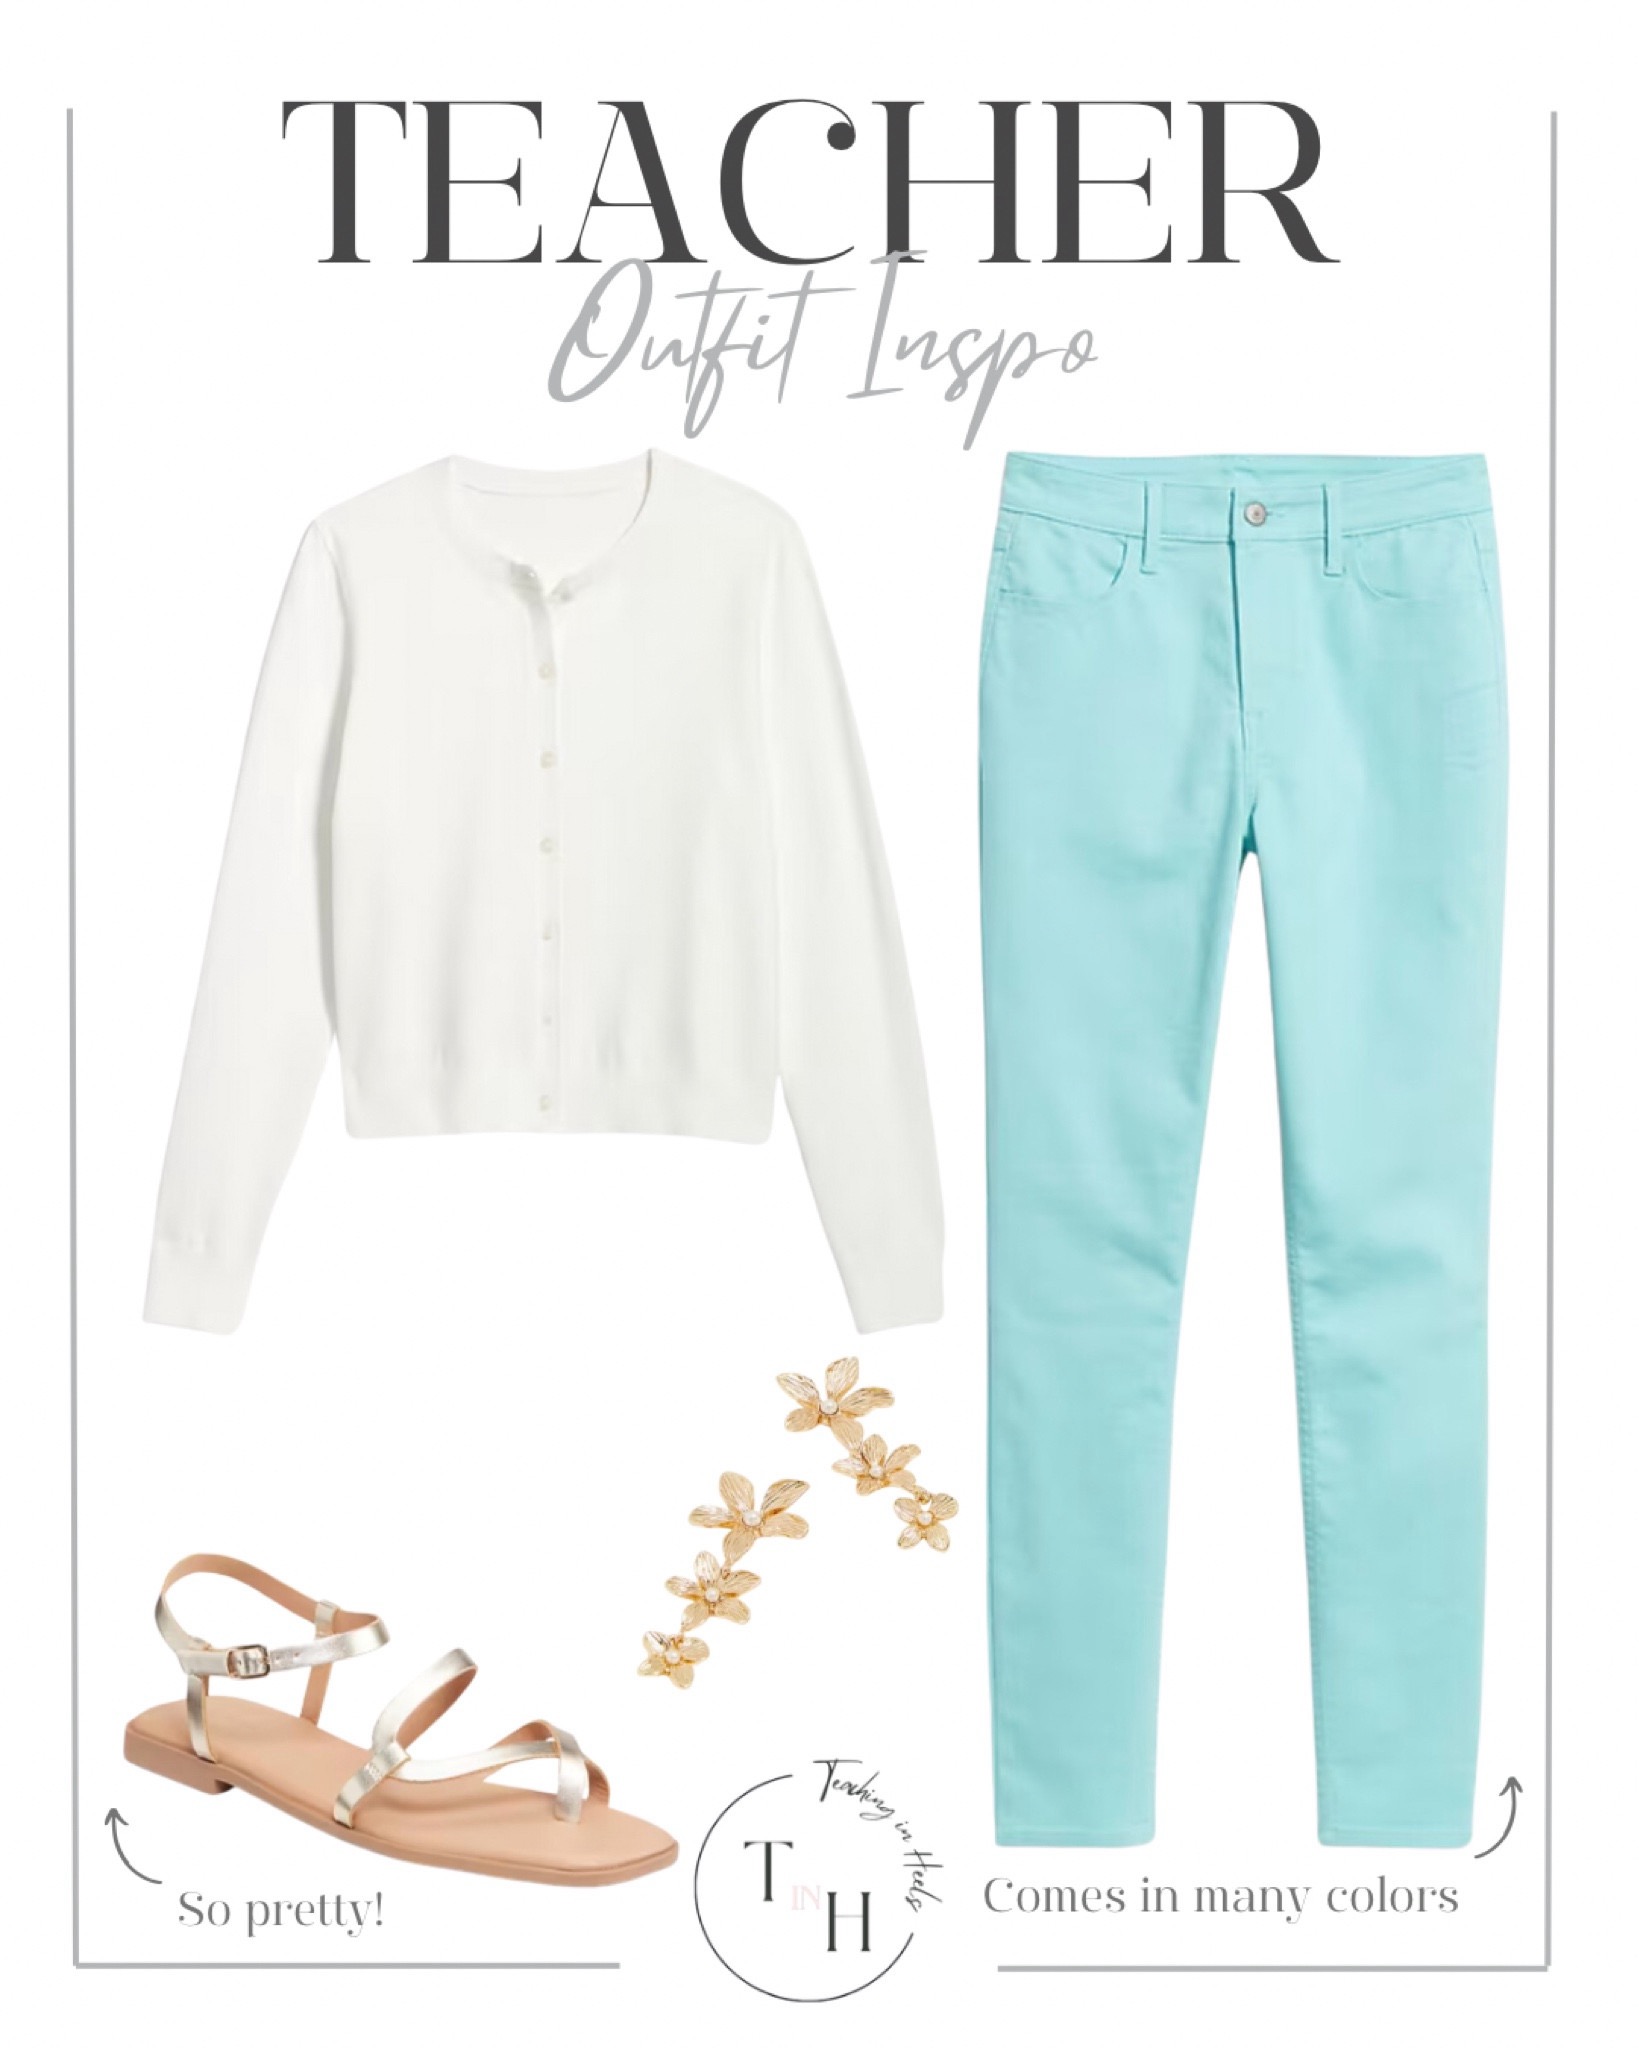 Chic & Comfortable: Spring Fashion for Teachers

spring, spring fashion, spring outfit, teacher outfit, workwear, work outfit 